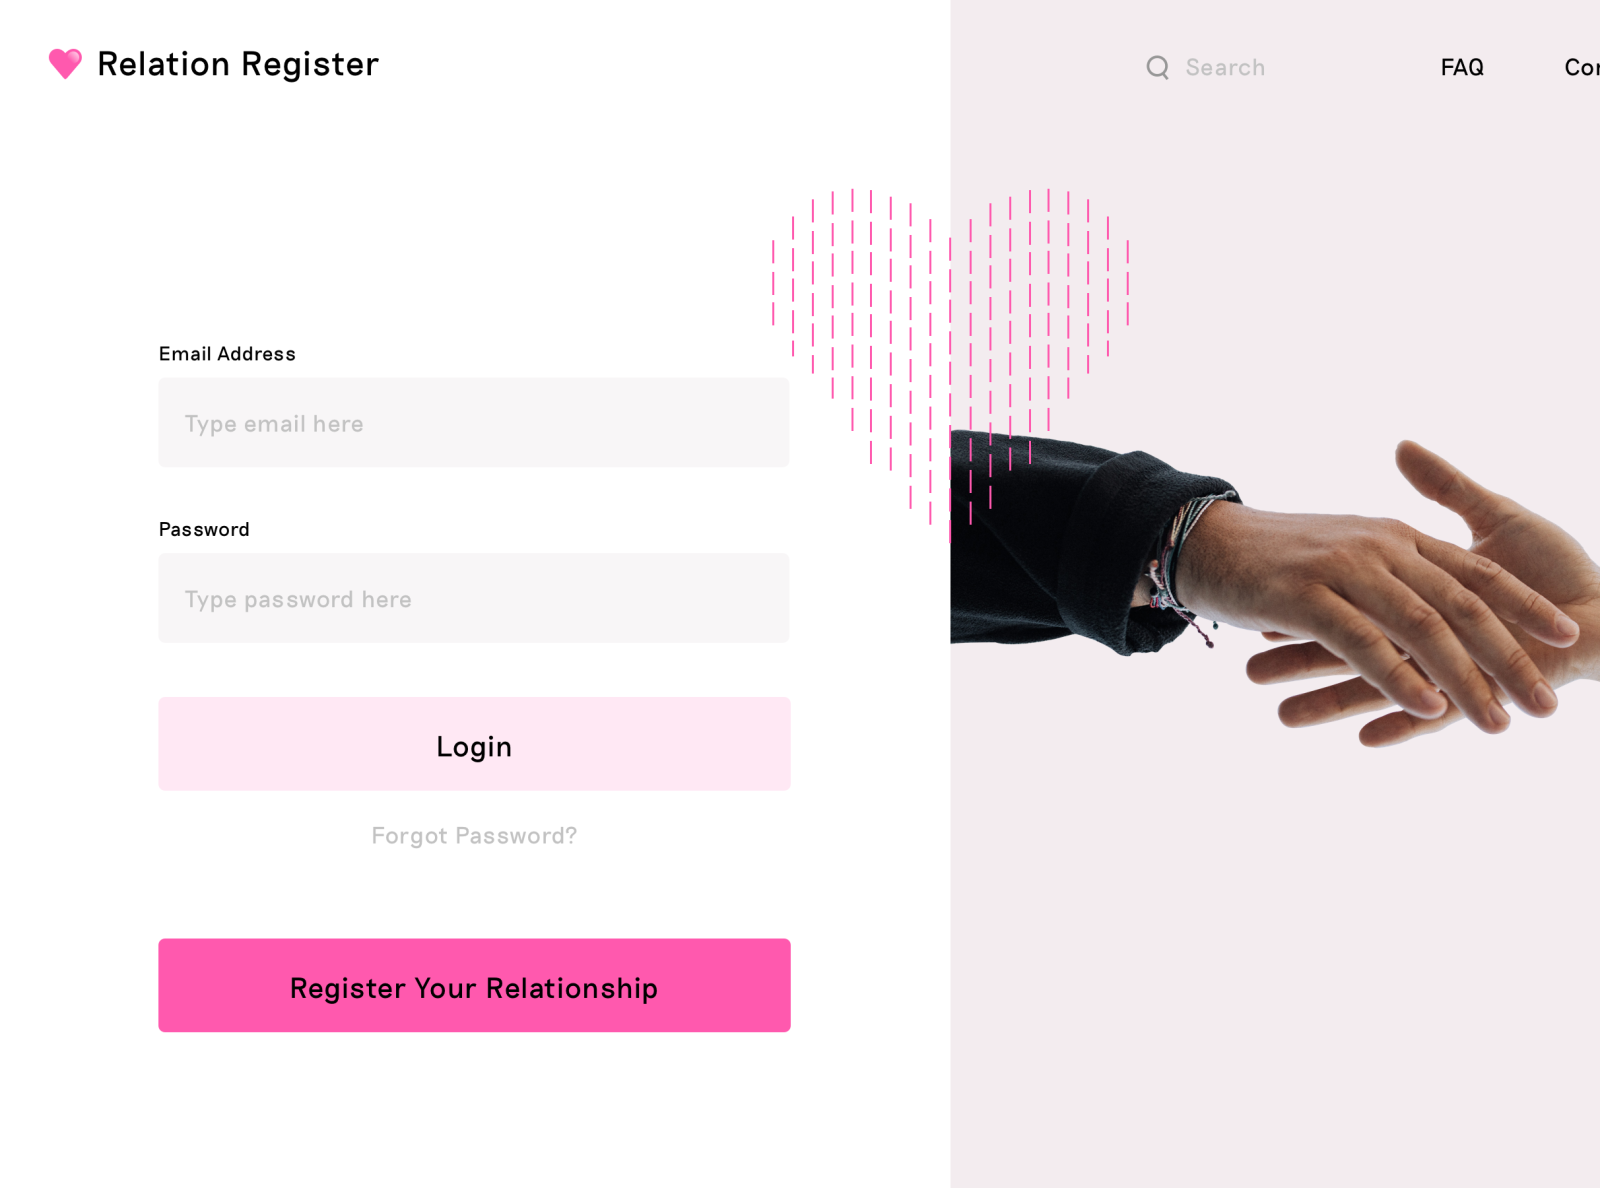 Relation register remaining pages